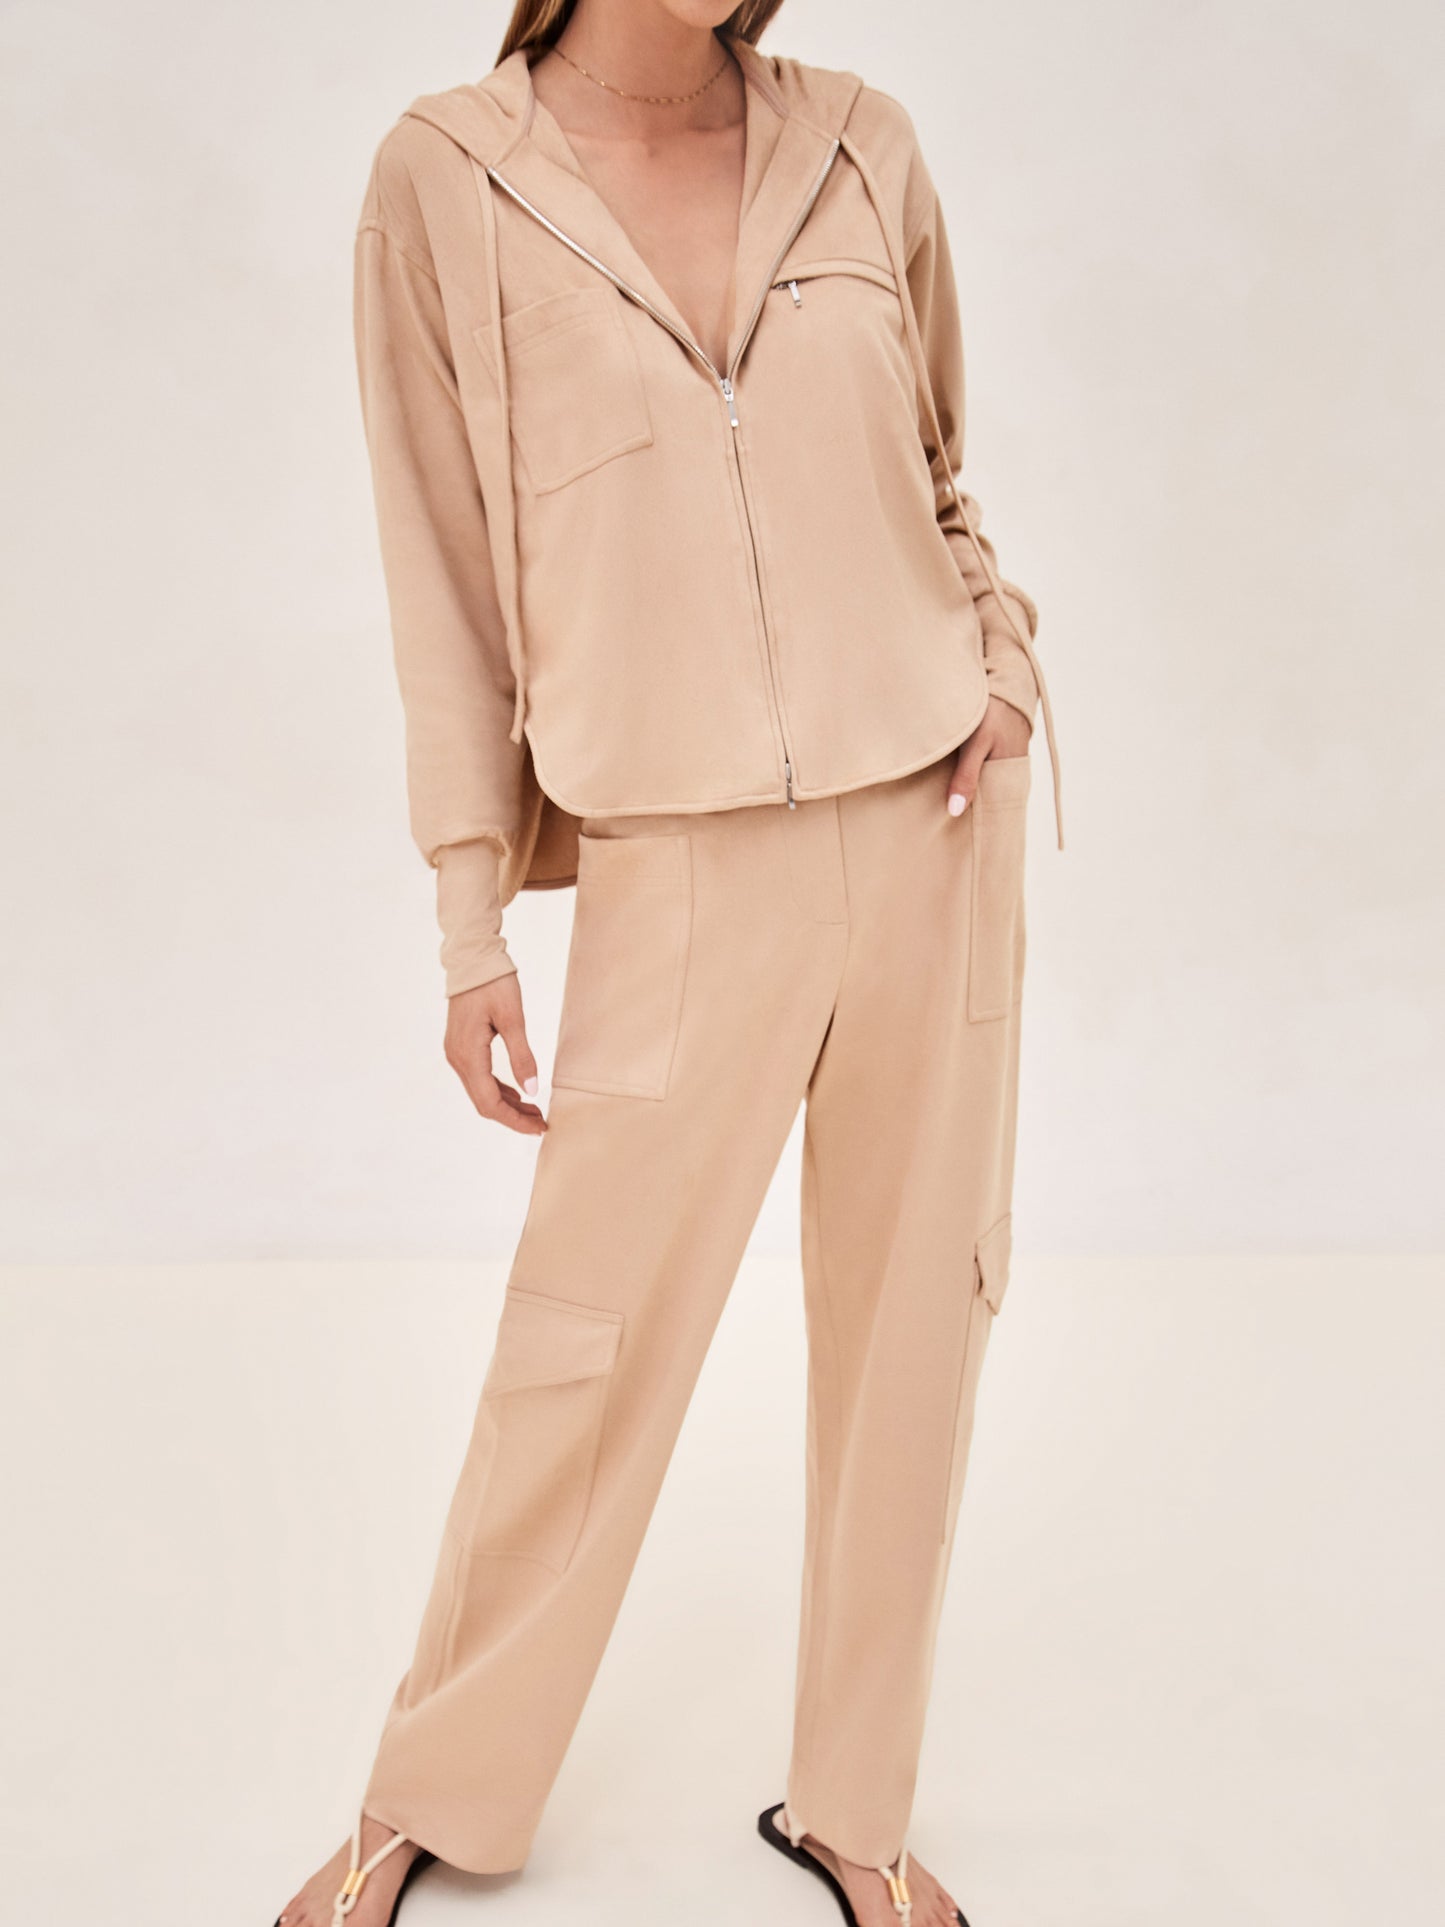 ALEXIS Emilian pants in camel. hover image